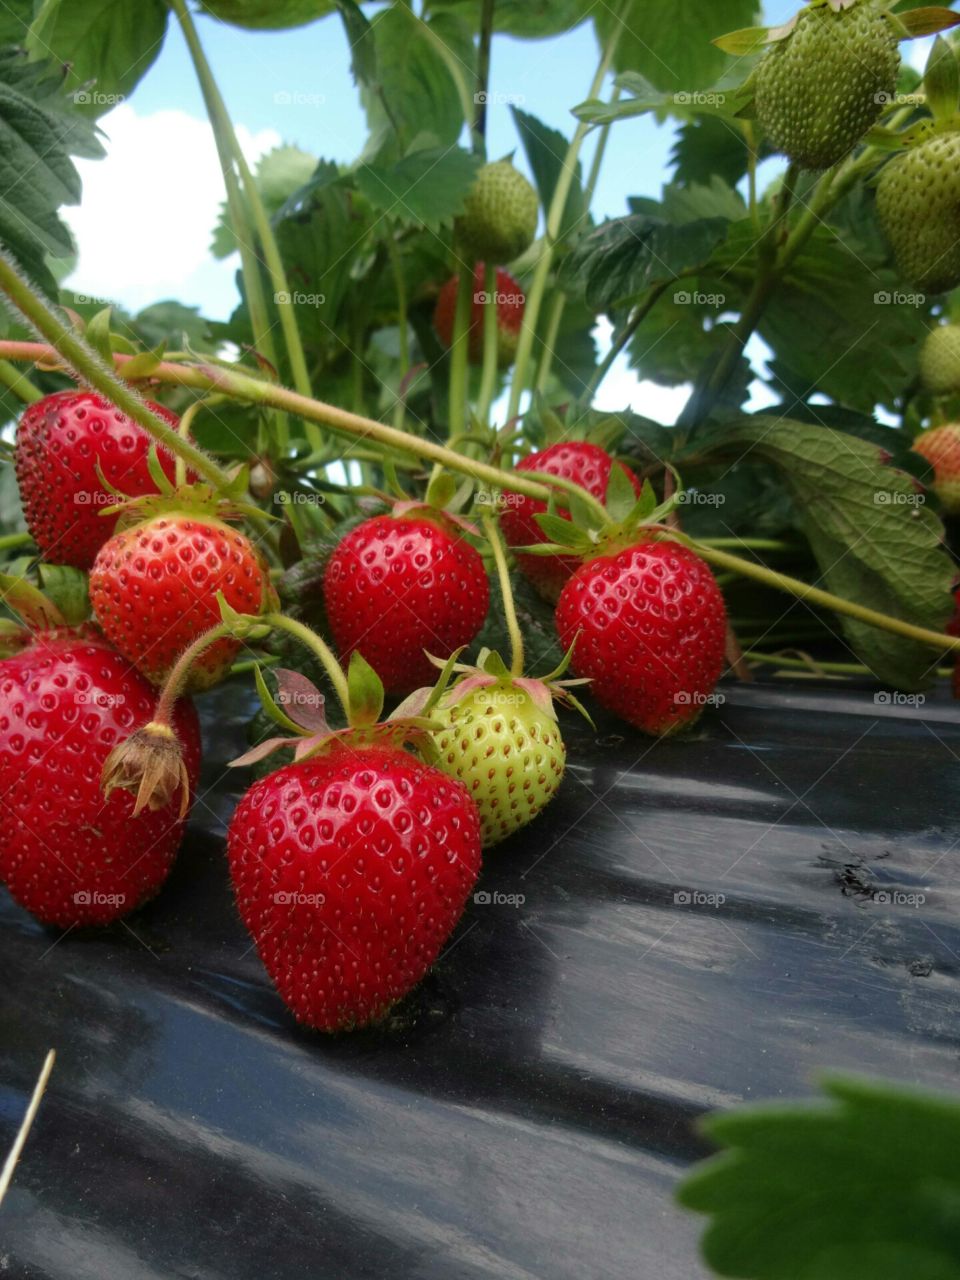 strawberry patch. ripened strawberries